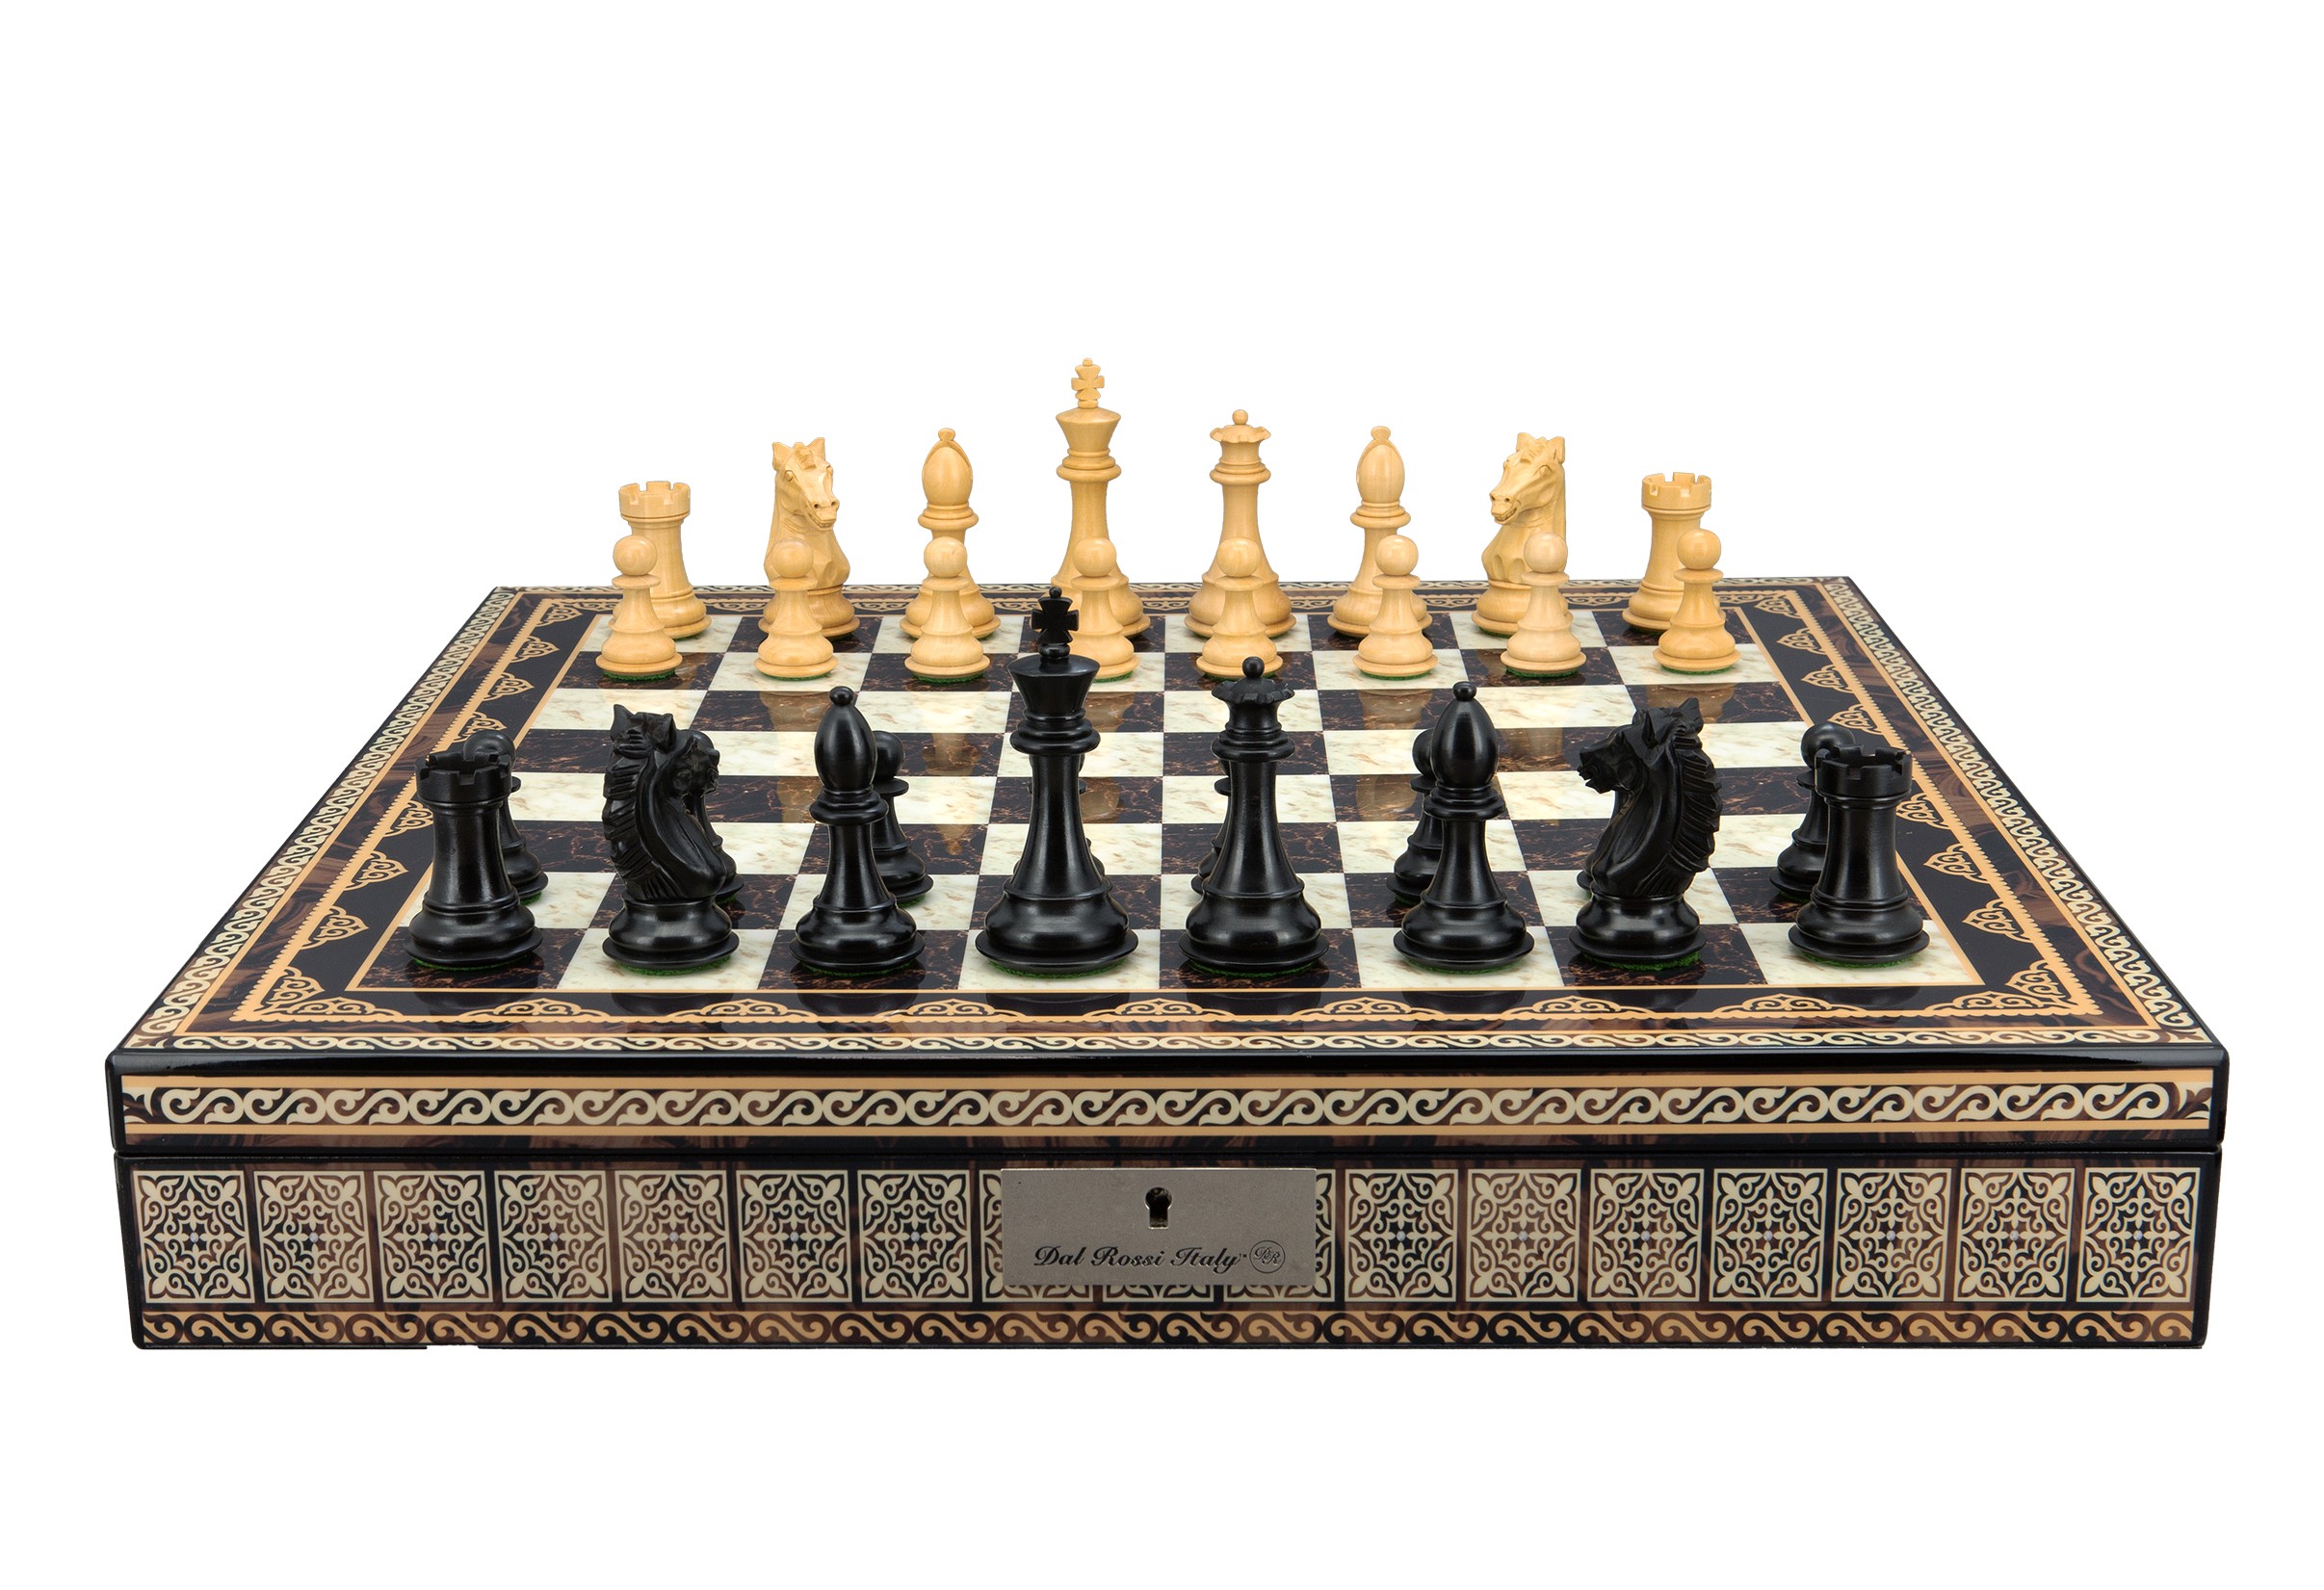 Dal Rossi Italy, Ebony Finish / Boxwood 95mm Wood Double Weighted on a Mosaic Finish Shiny Chess Box with Compartments 20"